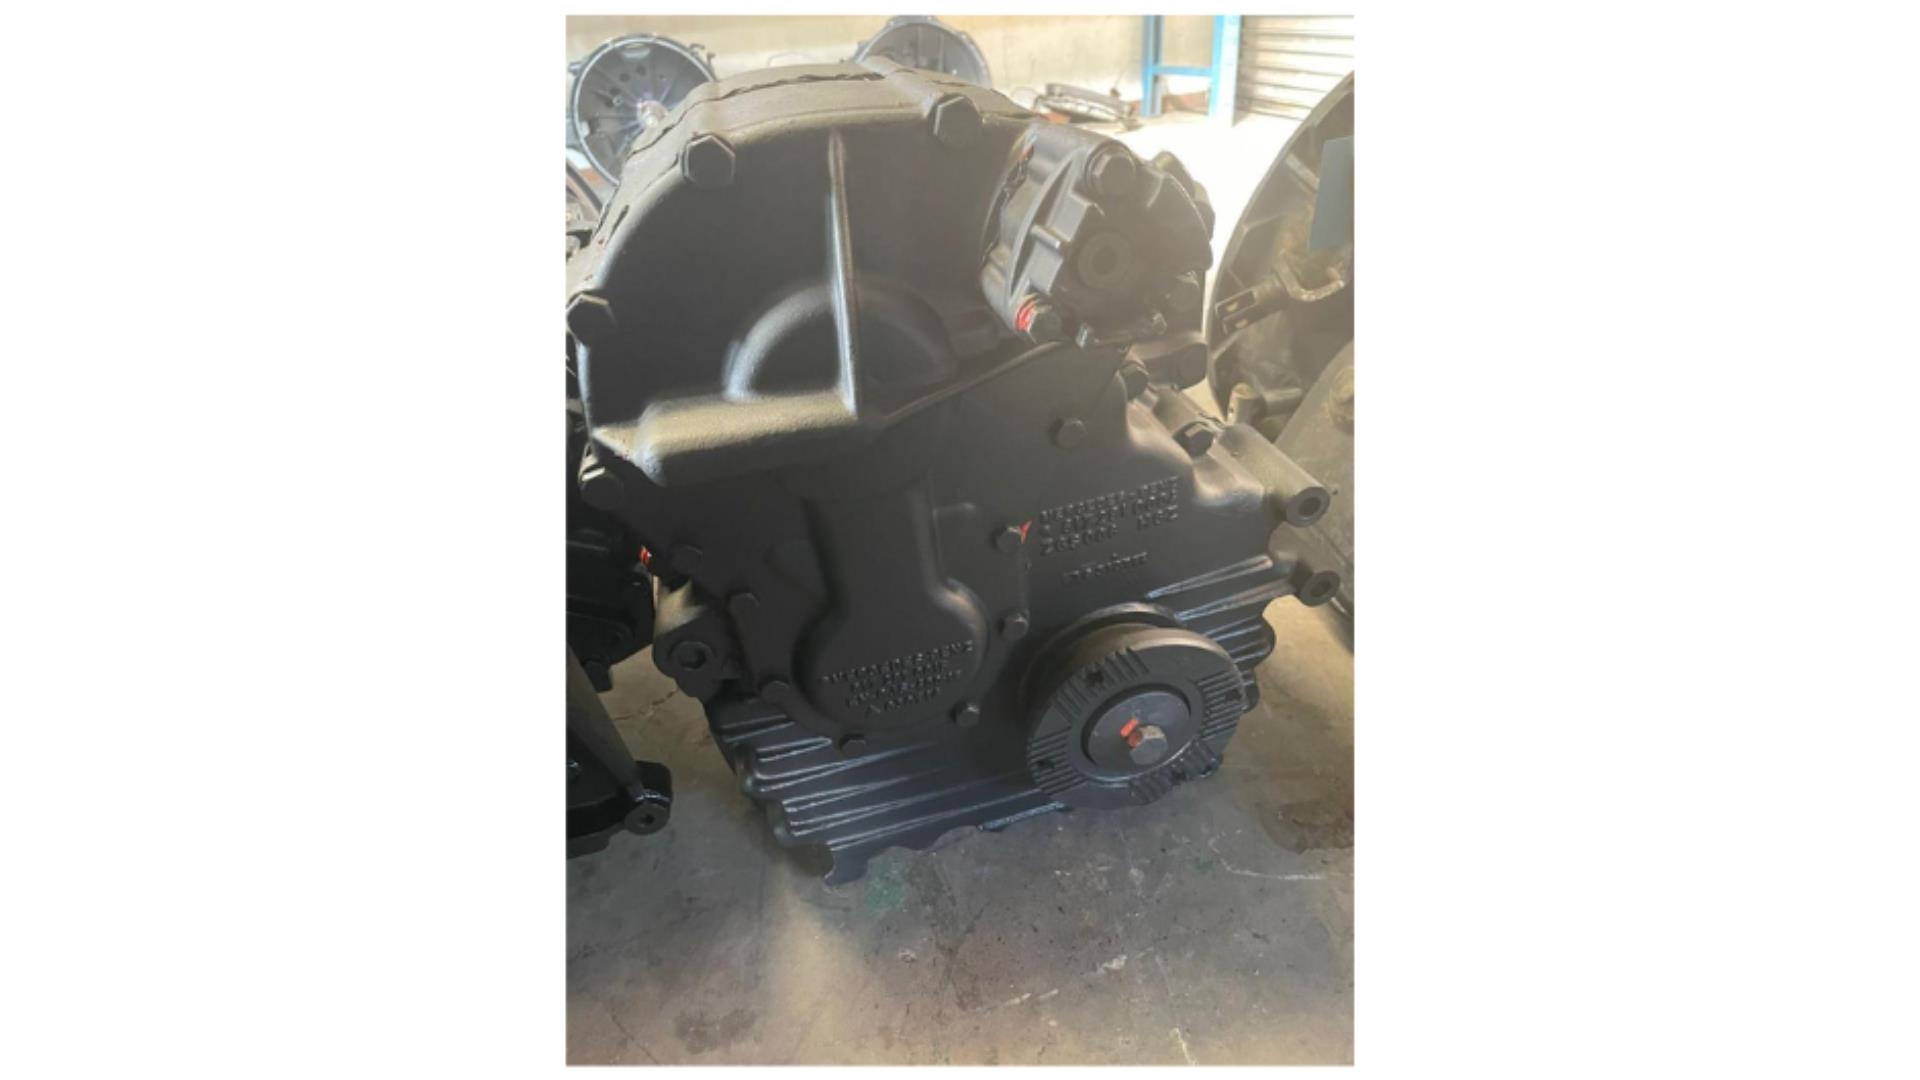 Mercedes Benz Recon Mercedes Atego VG900 Transfer Case Transfer case Truck  spares and parts for sale in KwaZulu-Natal | R 68,500 on Agrimag